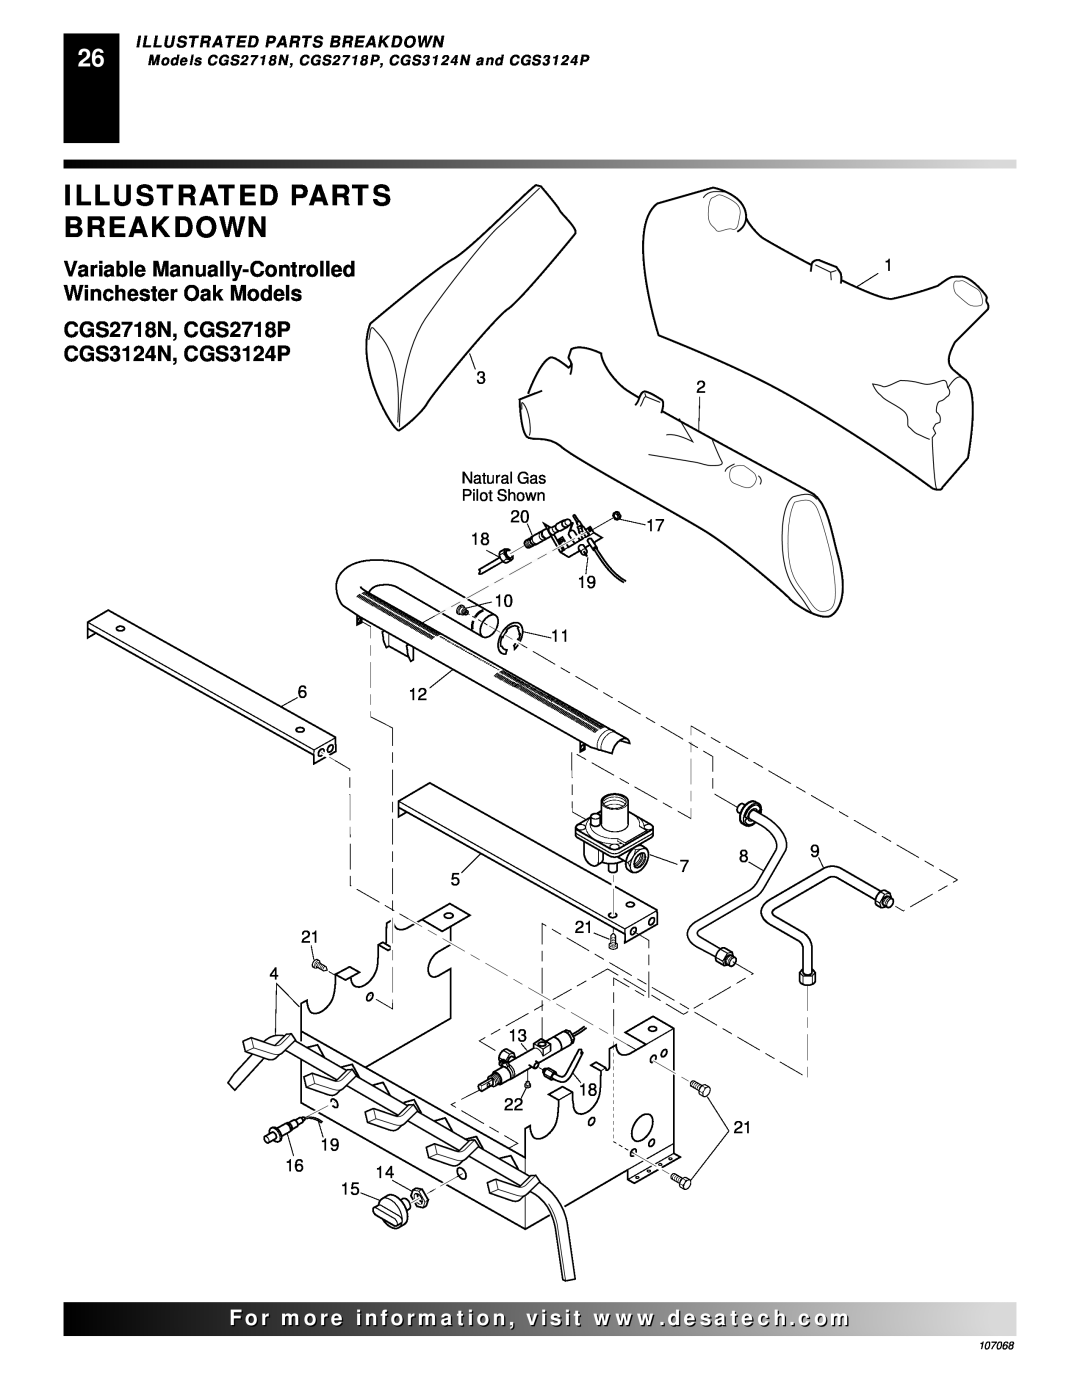 Desa CLD3018NA 24, CLD3924PTA Illustrated Parts Breakdown, Variable Manually-Controlled, Winchester Oak Models, 107068 